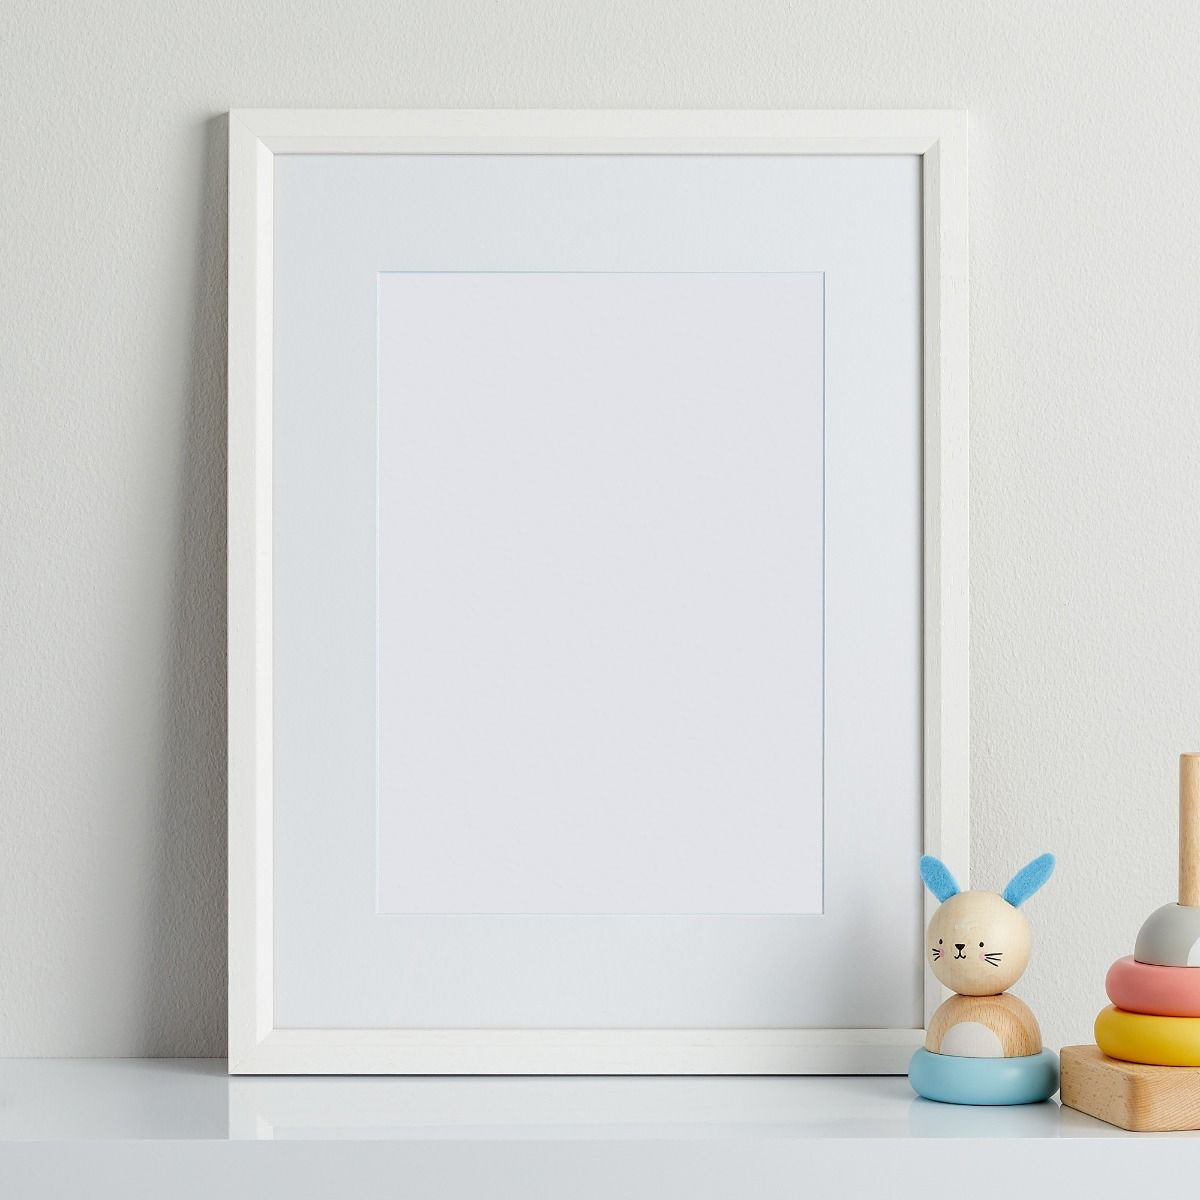 Yes, I would like a white frame for £14.00